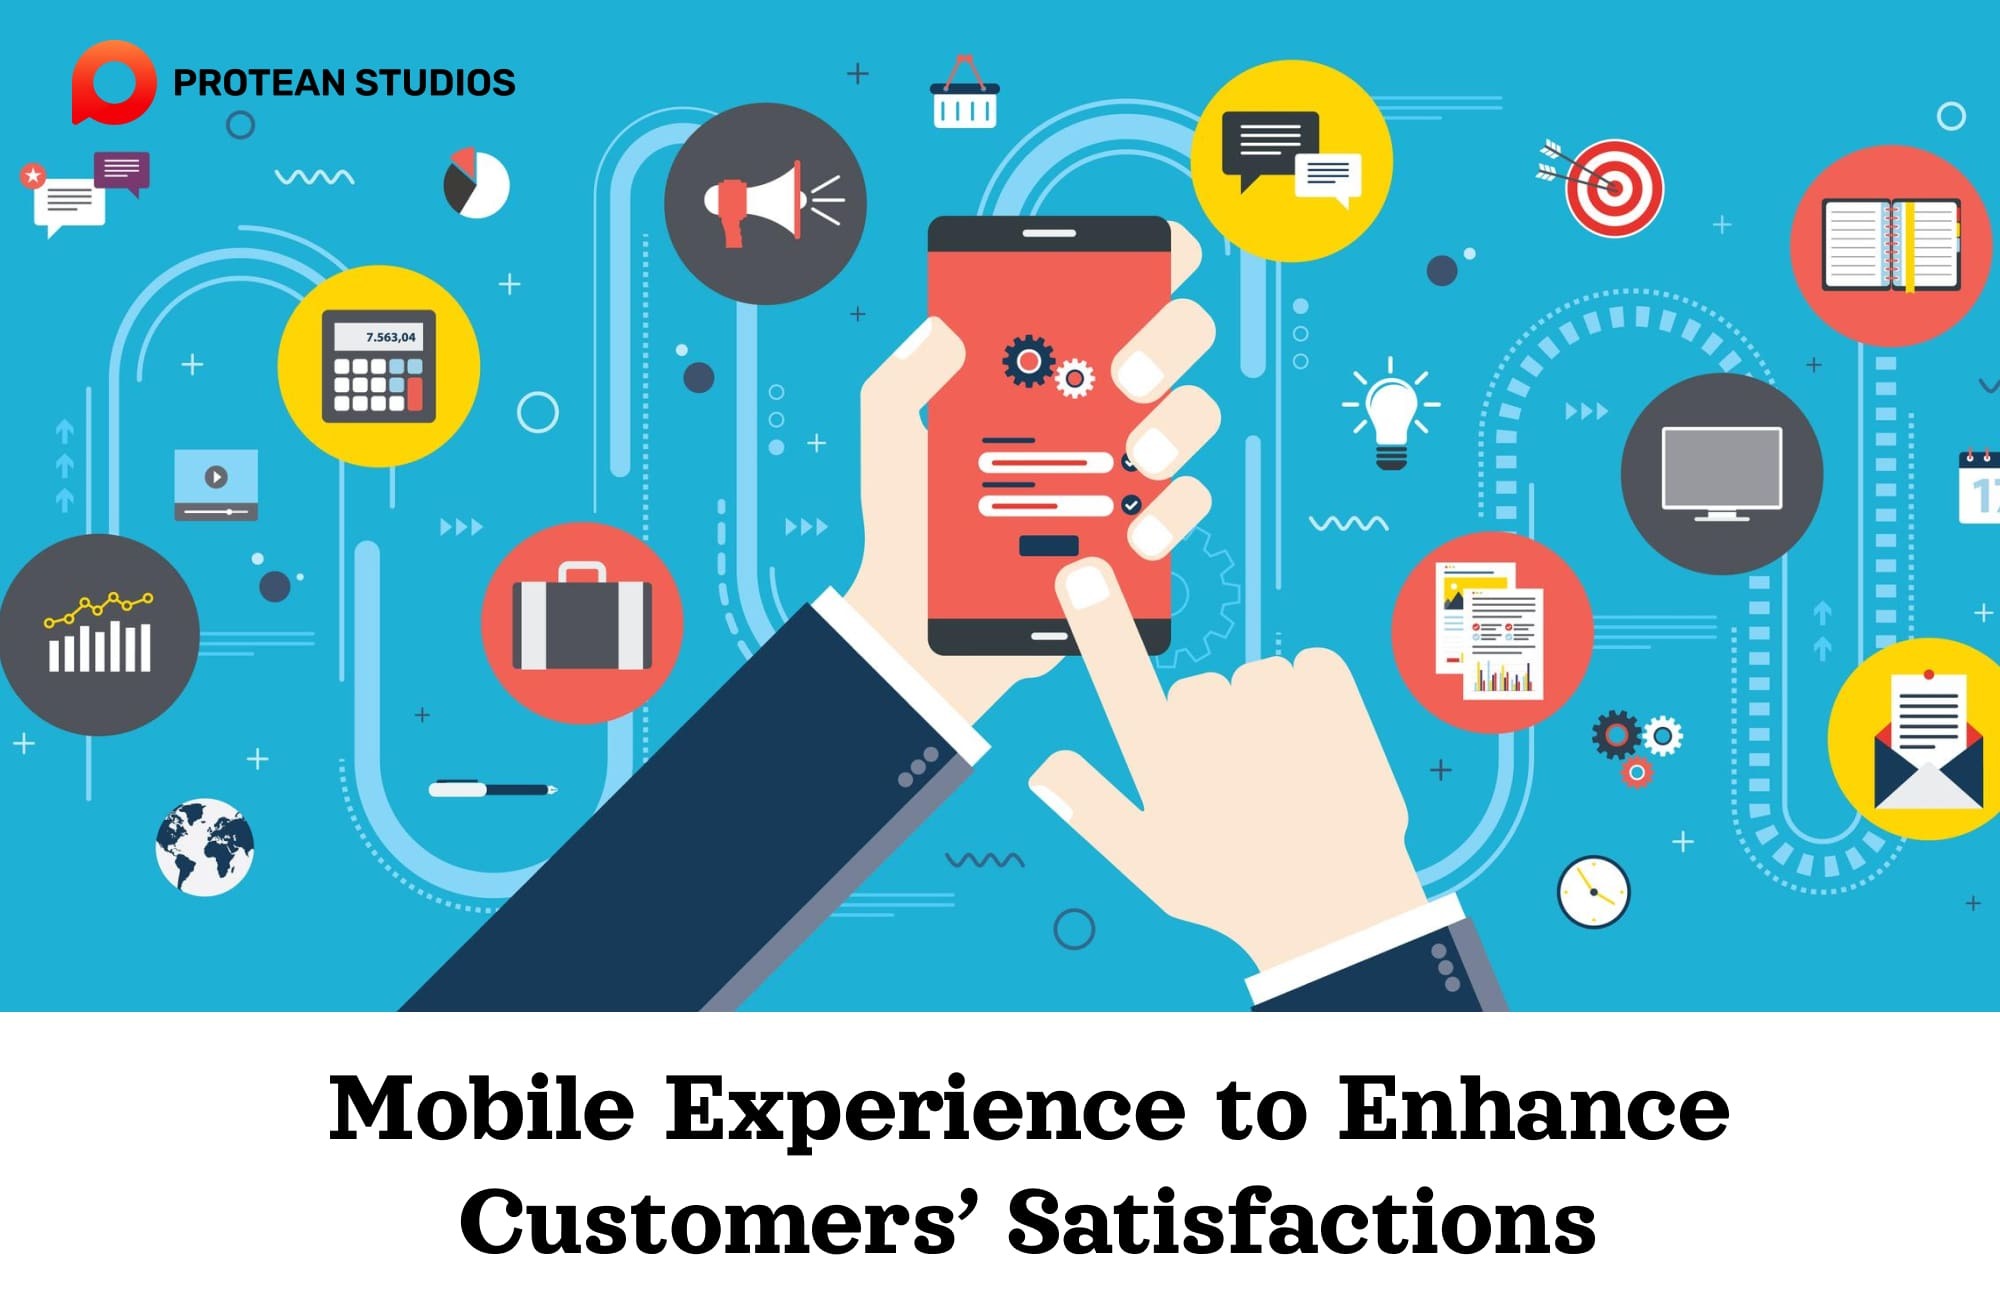 Enhance customers’ experiences with mobile apps